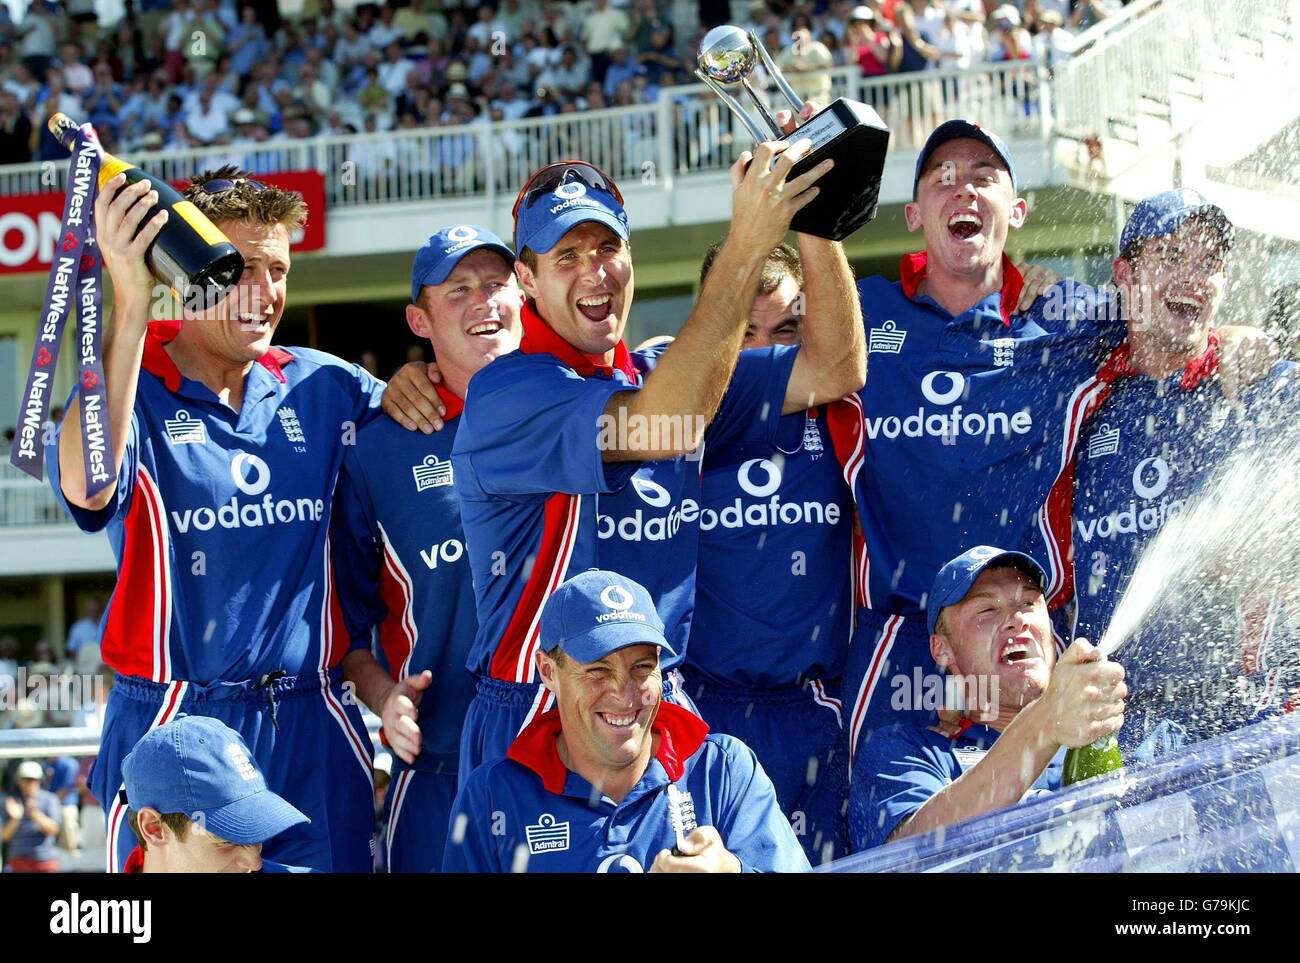 England captain Michael Vaughan leads the England celebrations with the trophy after thier 7 wicket victory over South Africa in The NatWest Series Final at Lords, London. England won by seven wickets. Stock Photo